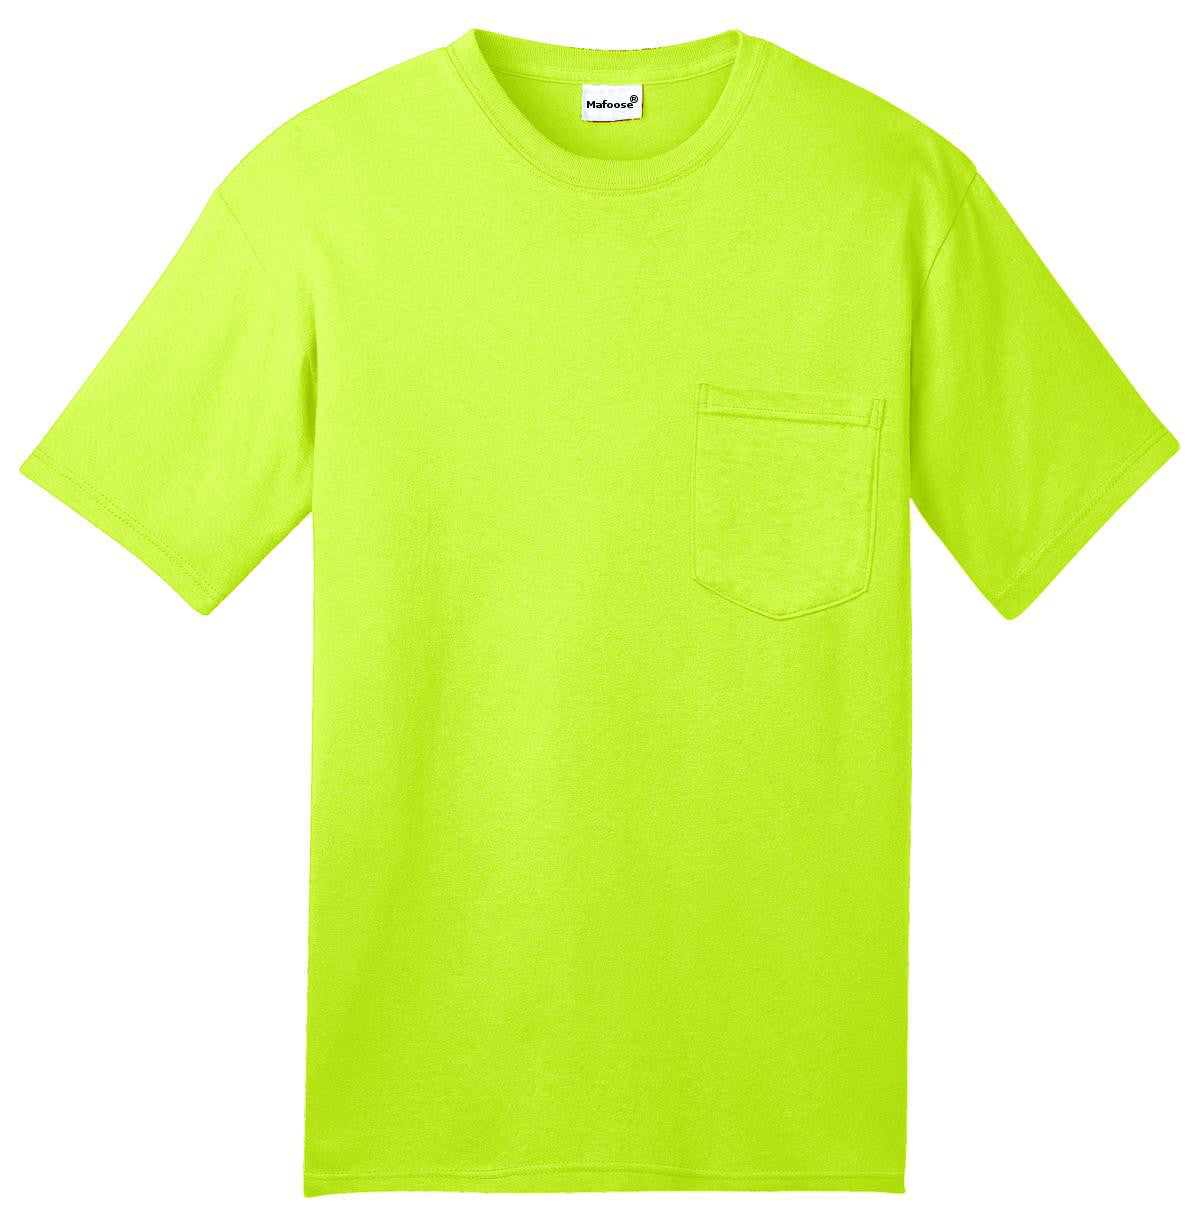 Mafoose Men's All American Tee Shirt with Pocket Safety Green-Front